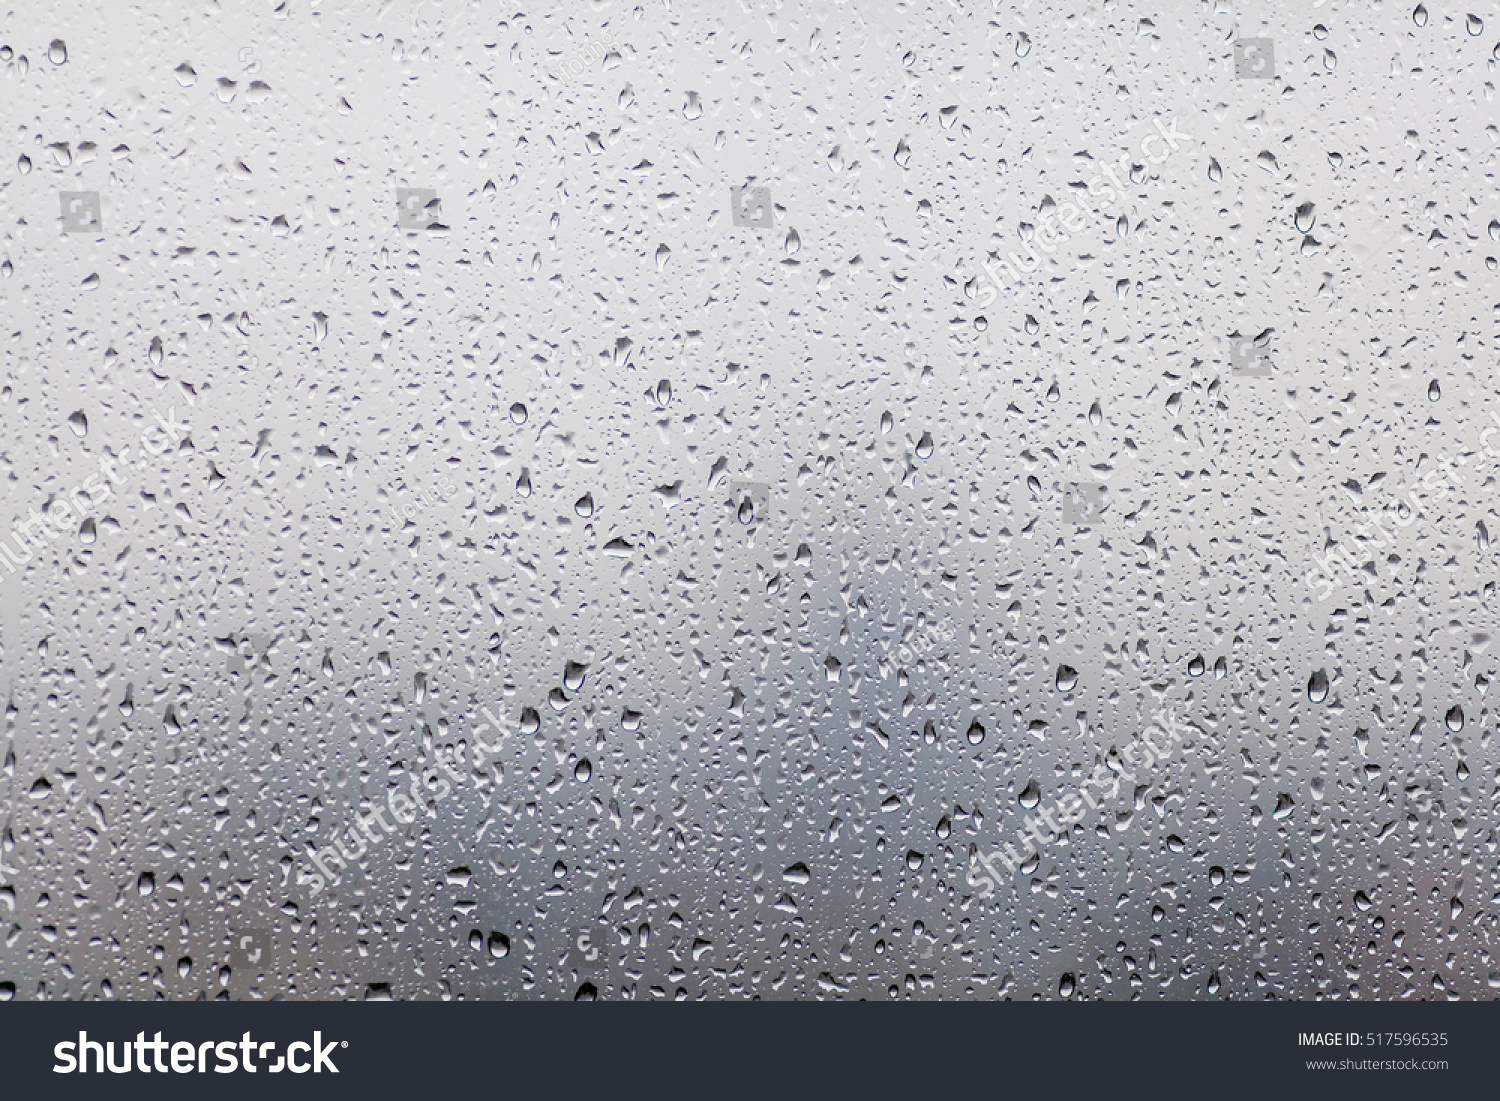 Raindrops on glasses surface. Natural Pattern of rain drops isolated on cloudy background. #517596535